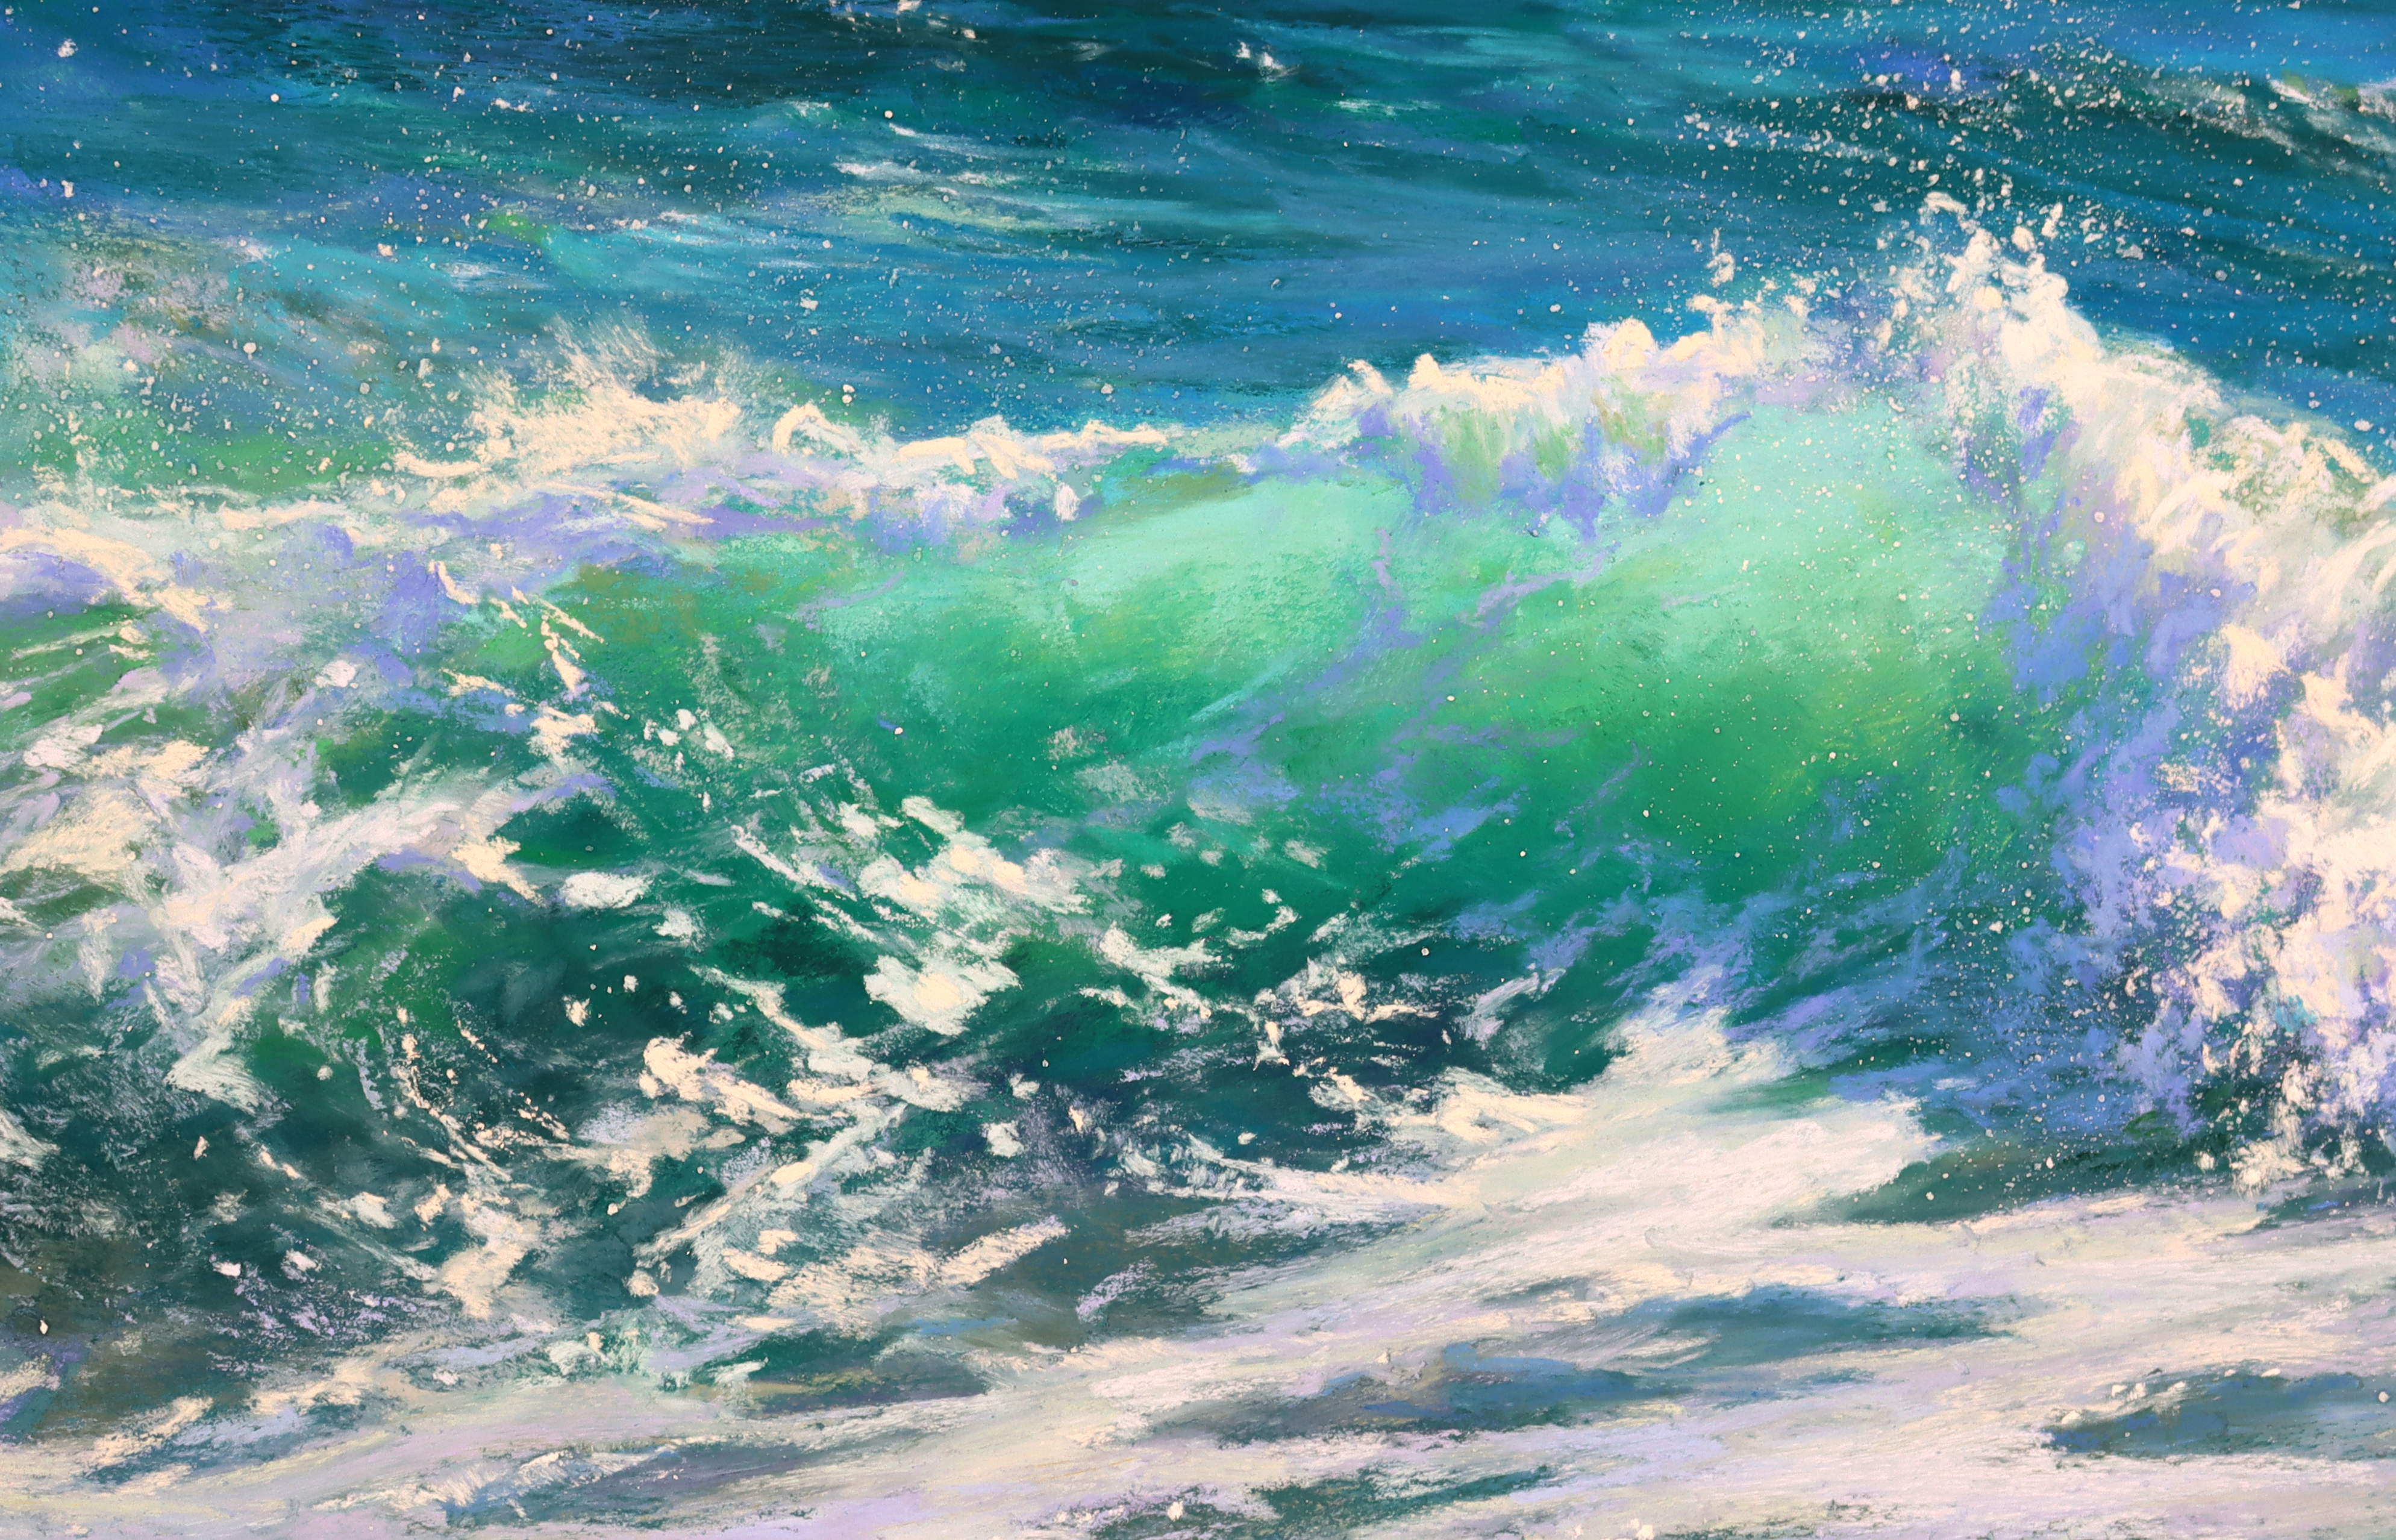 Painting Waves with Pastels | Painting with Lana Ballot